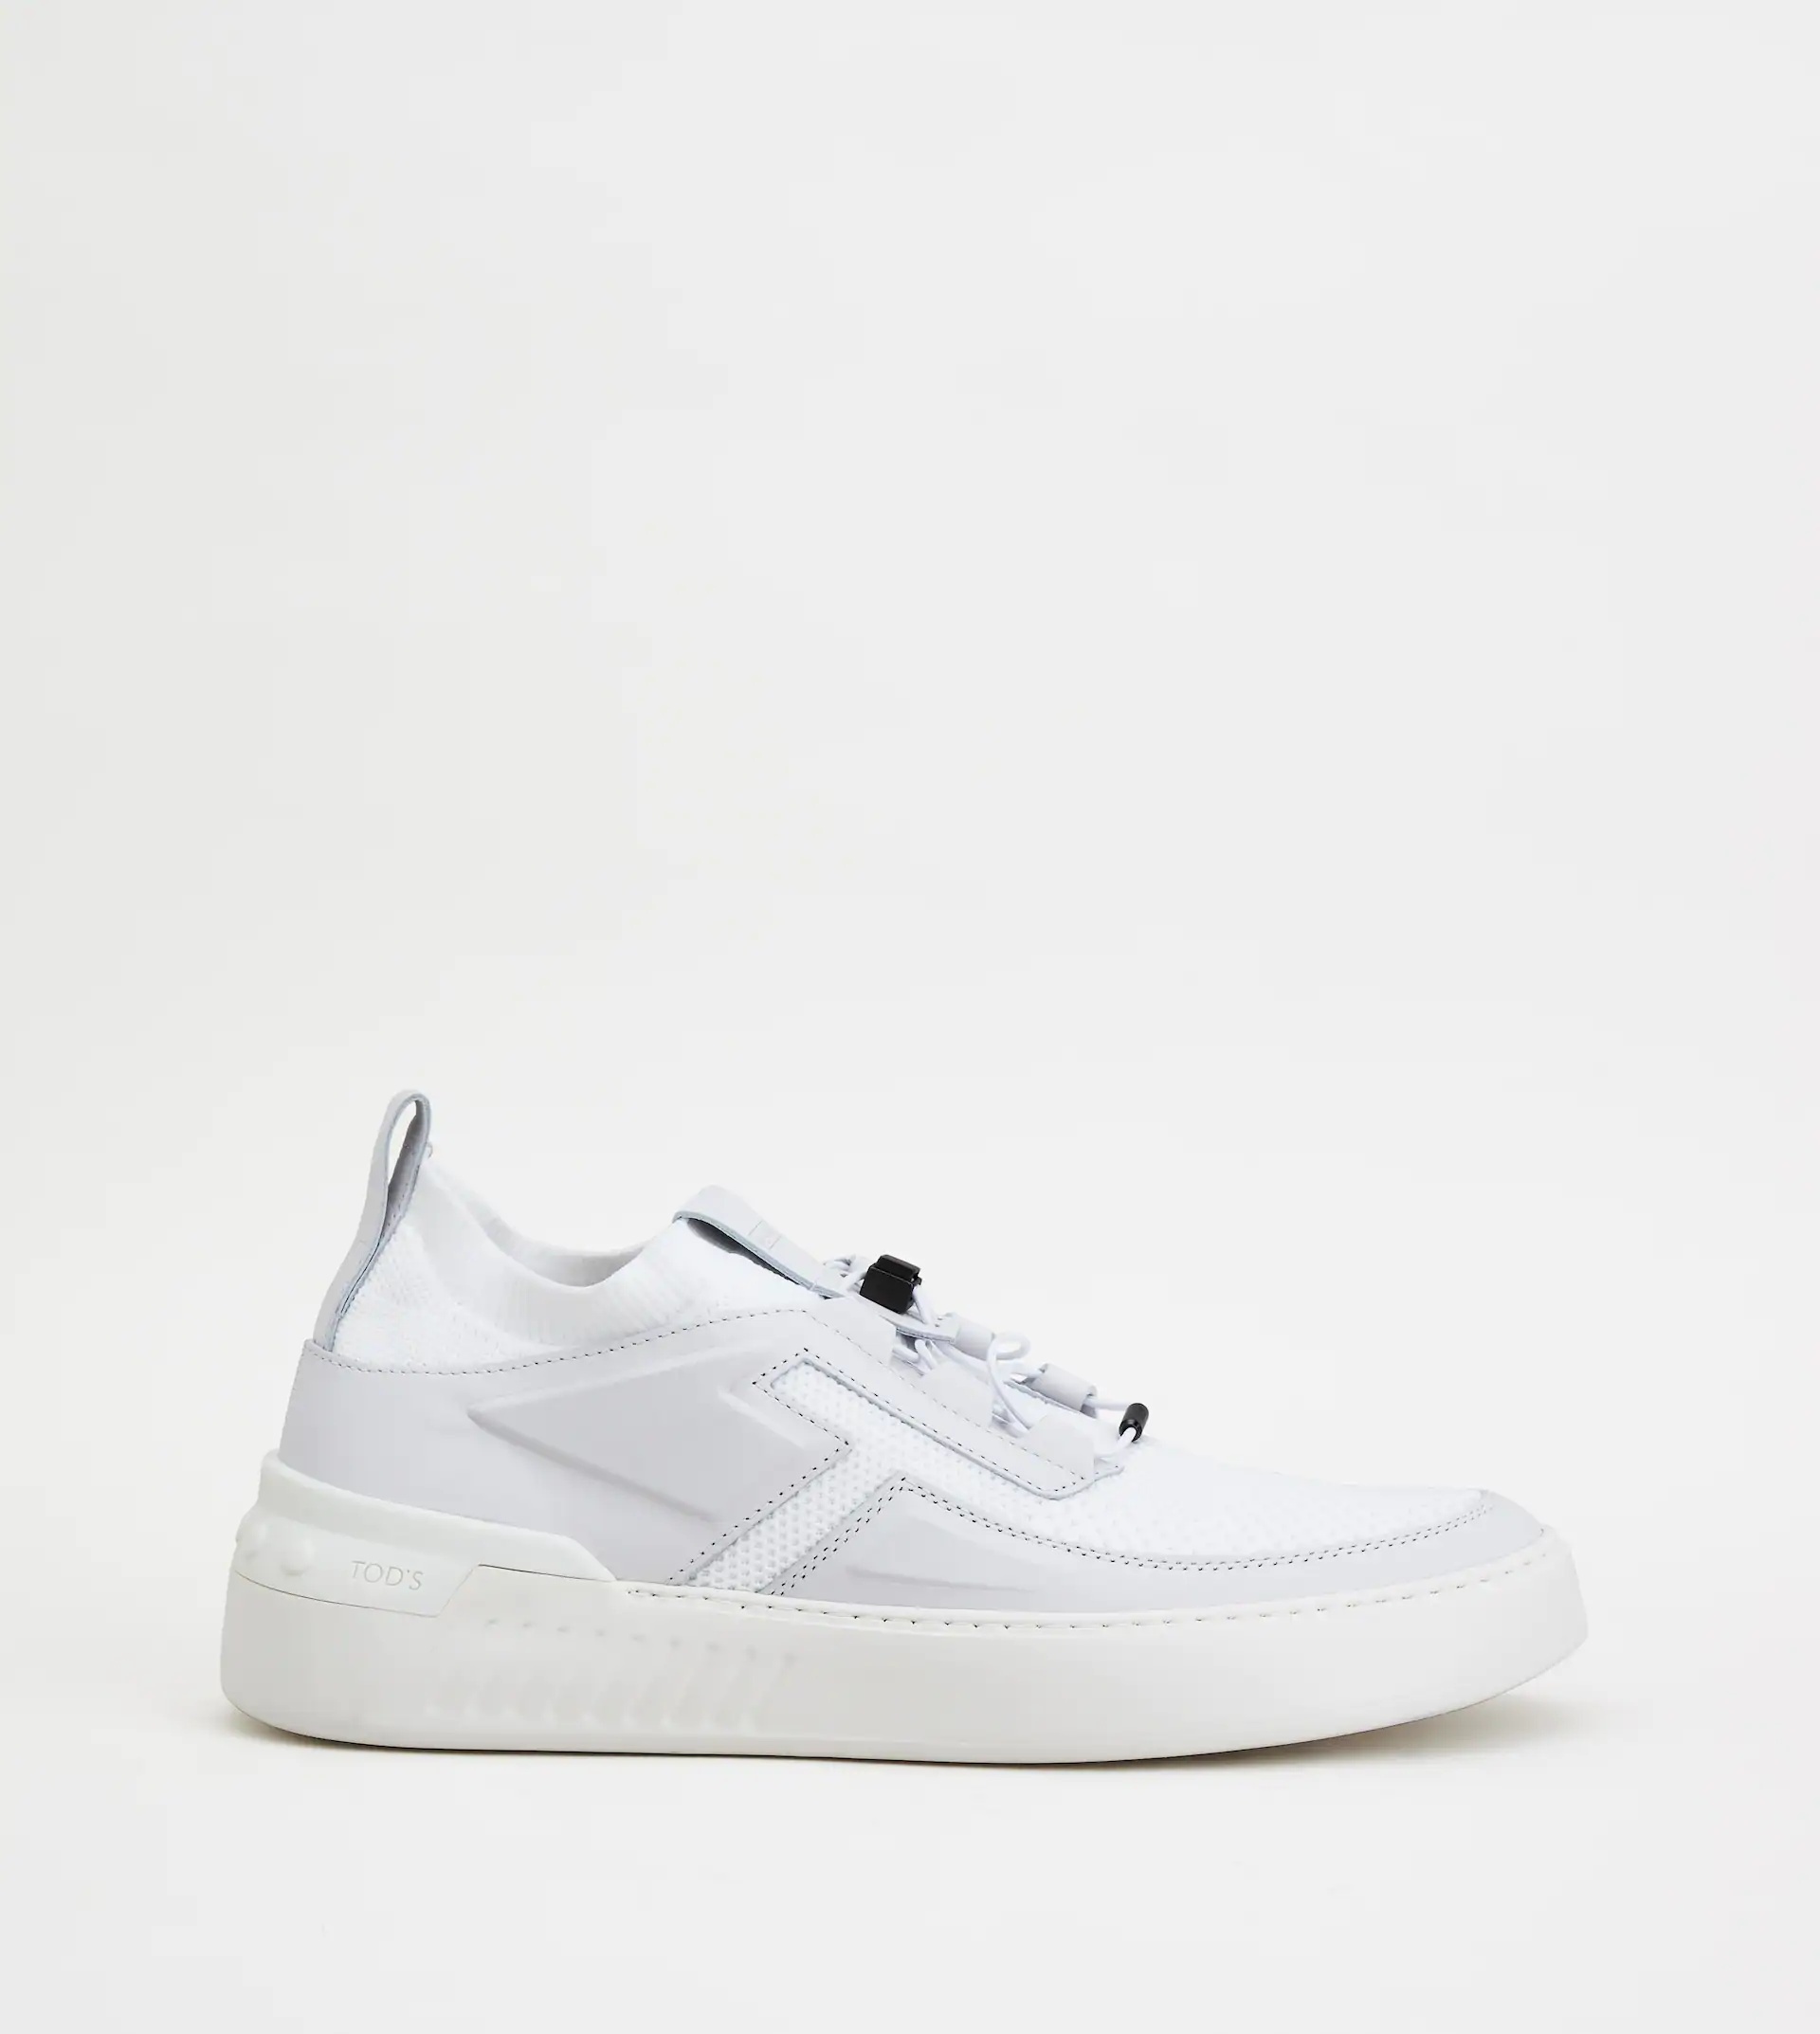 NO_CODE X IN LEATHER AND HIGH TECH FABRIC - WHITE - 1